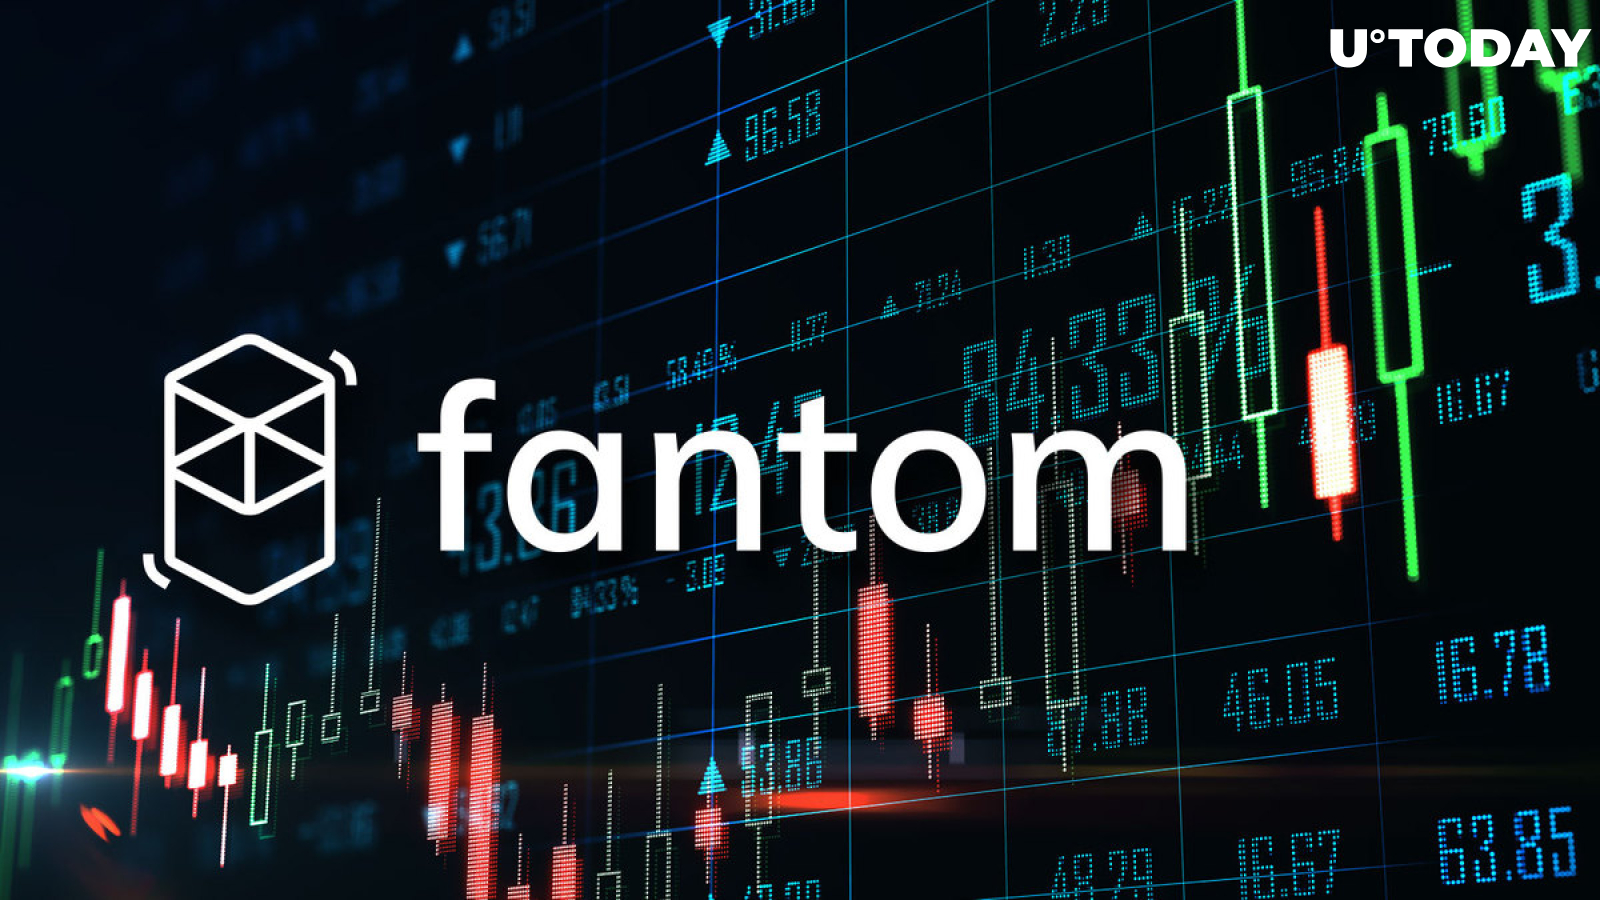 FTM up 11% as Hundreds of Millions of Dollars in Fantom Reserves Are Unveiled